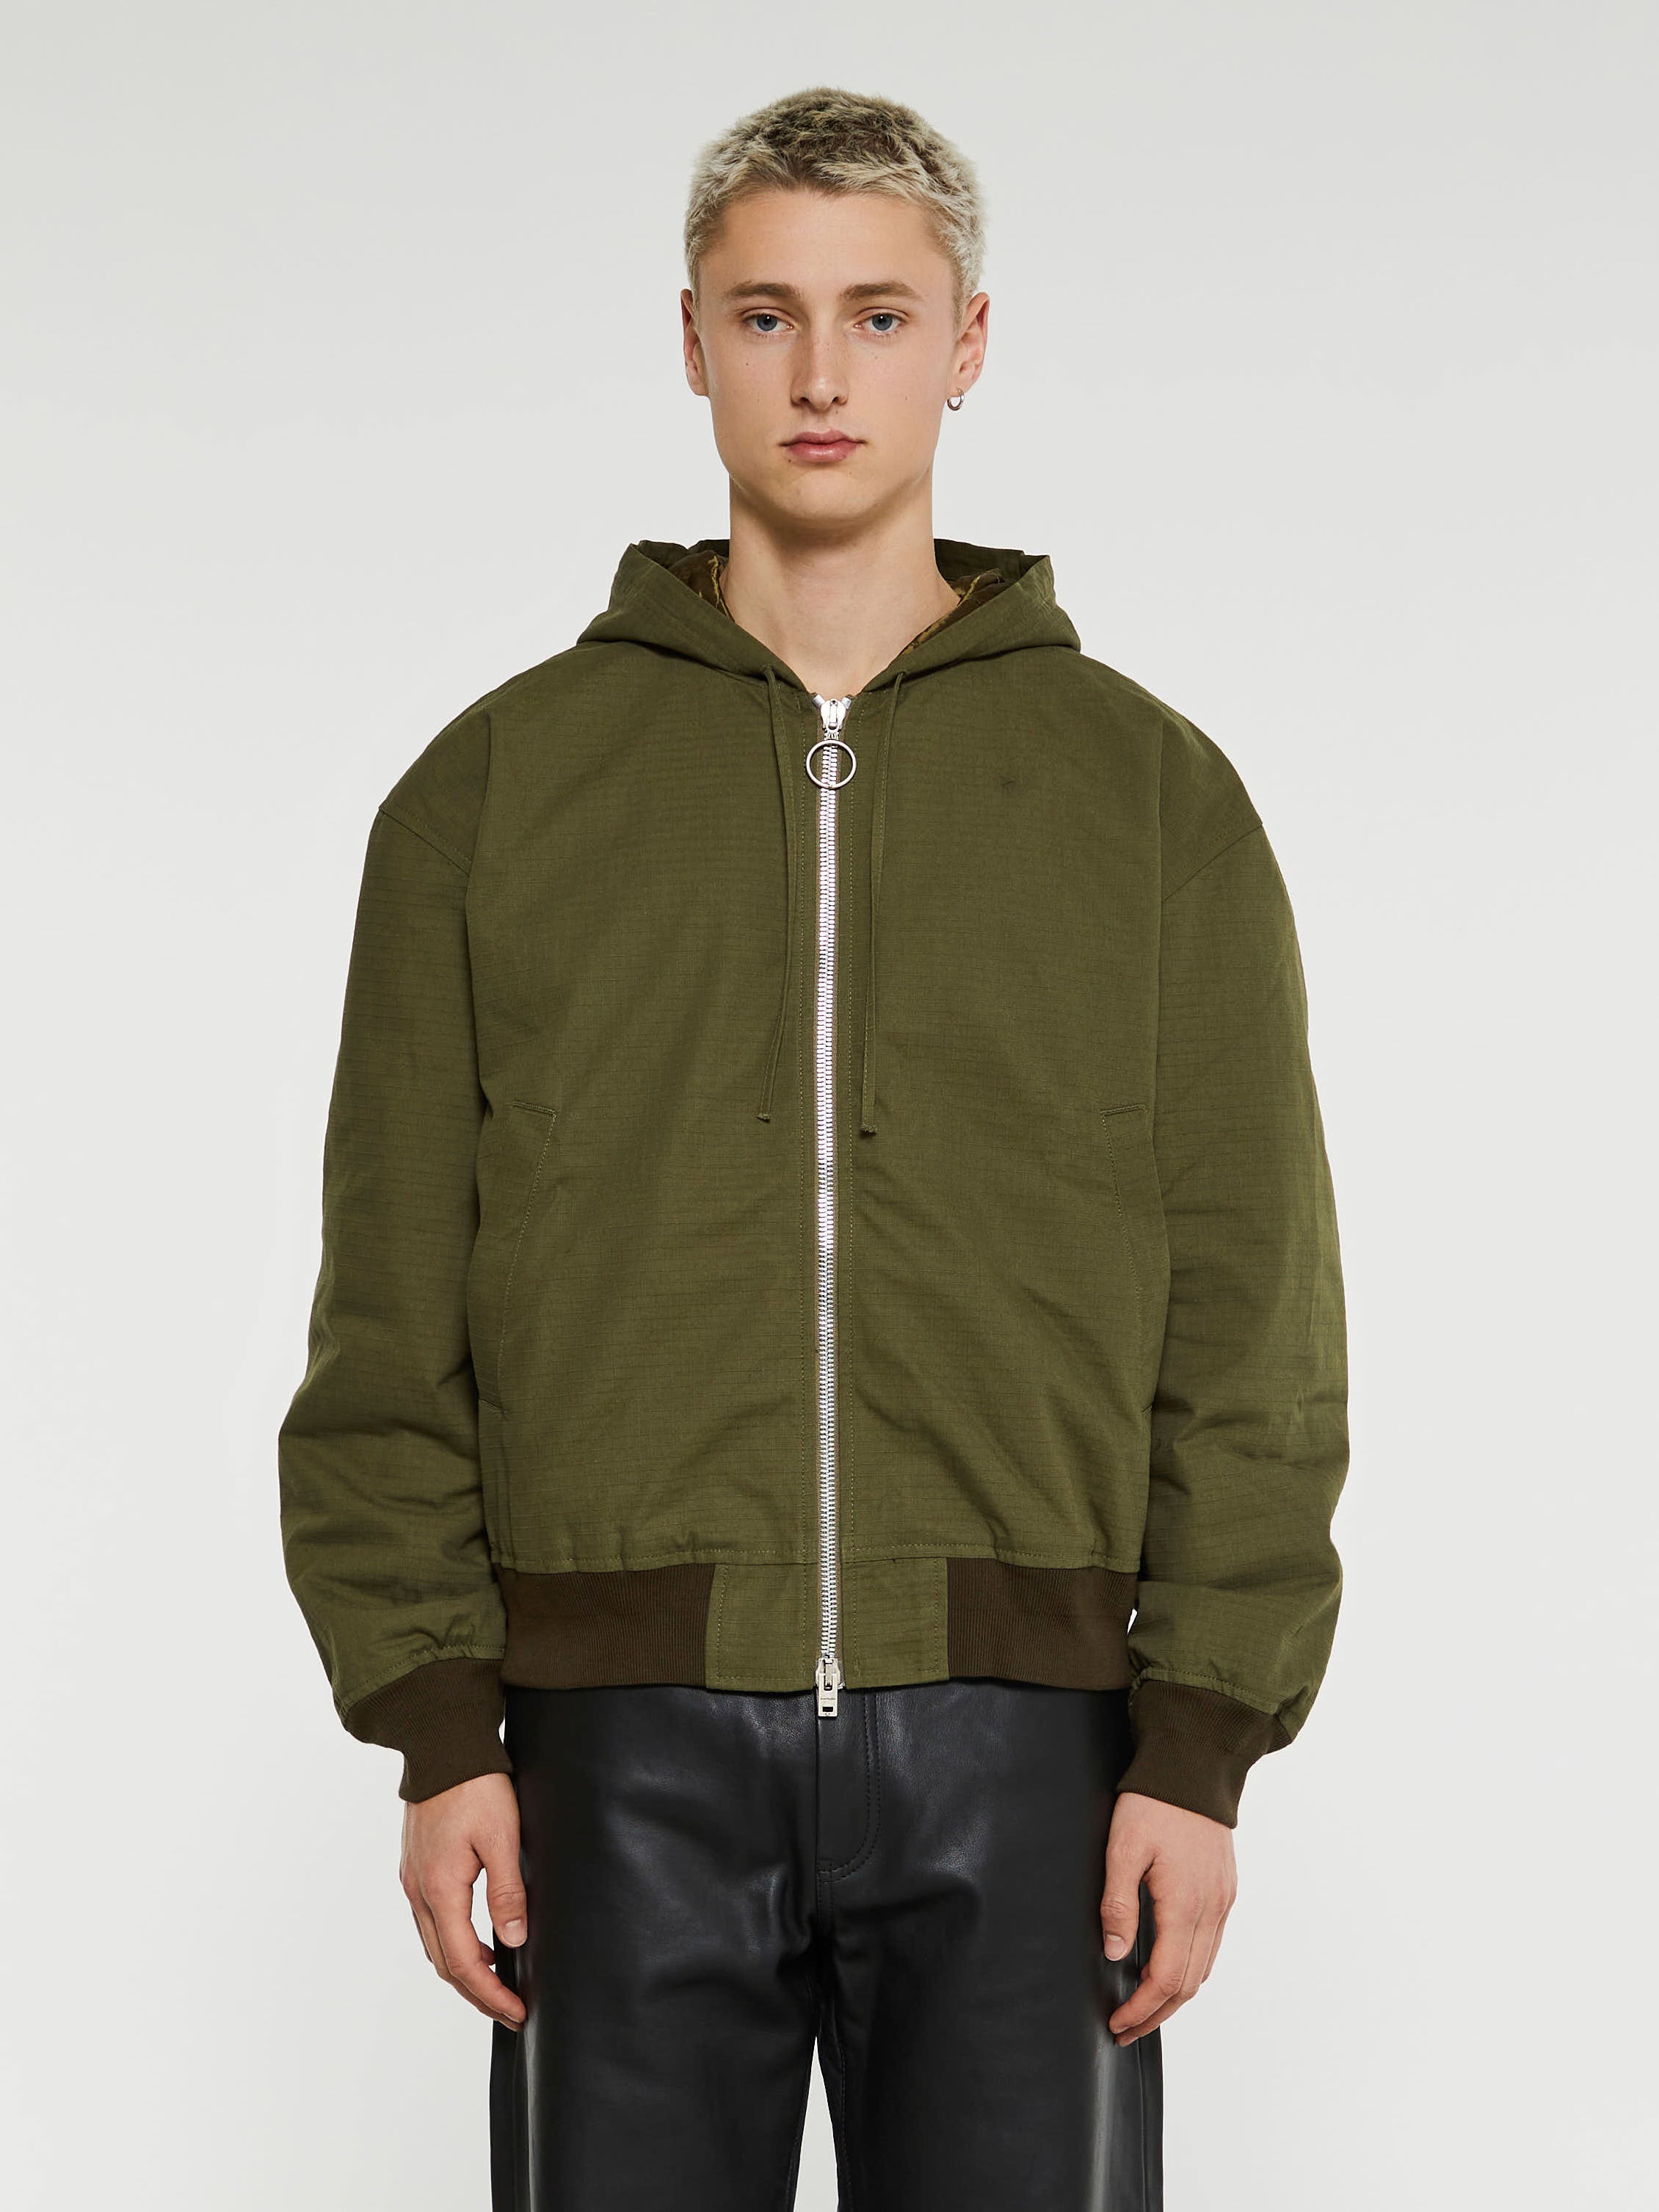 Acne Studios - Ripstop Padded Jacket in Olive Green